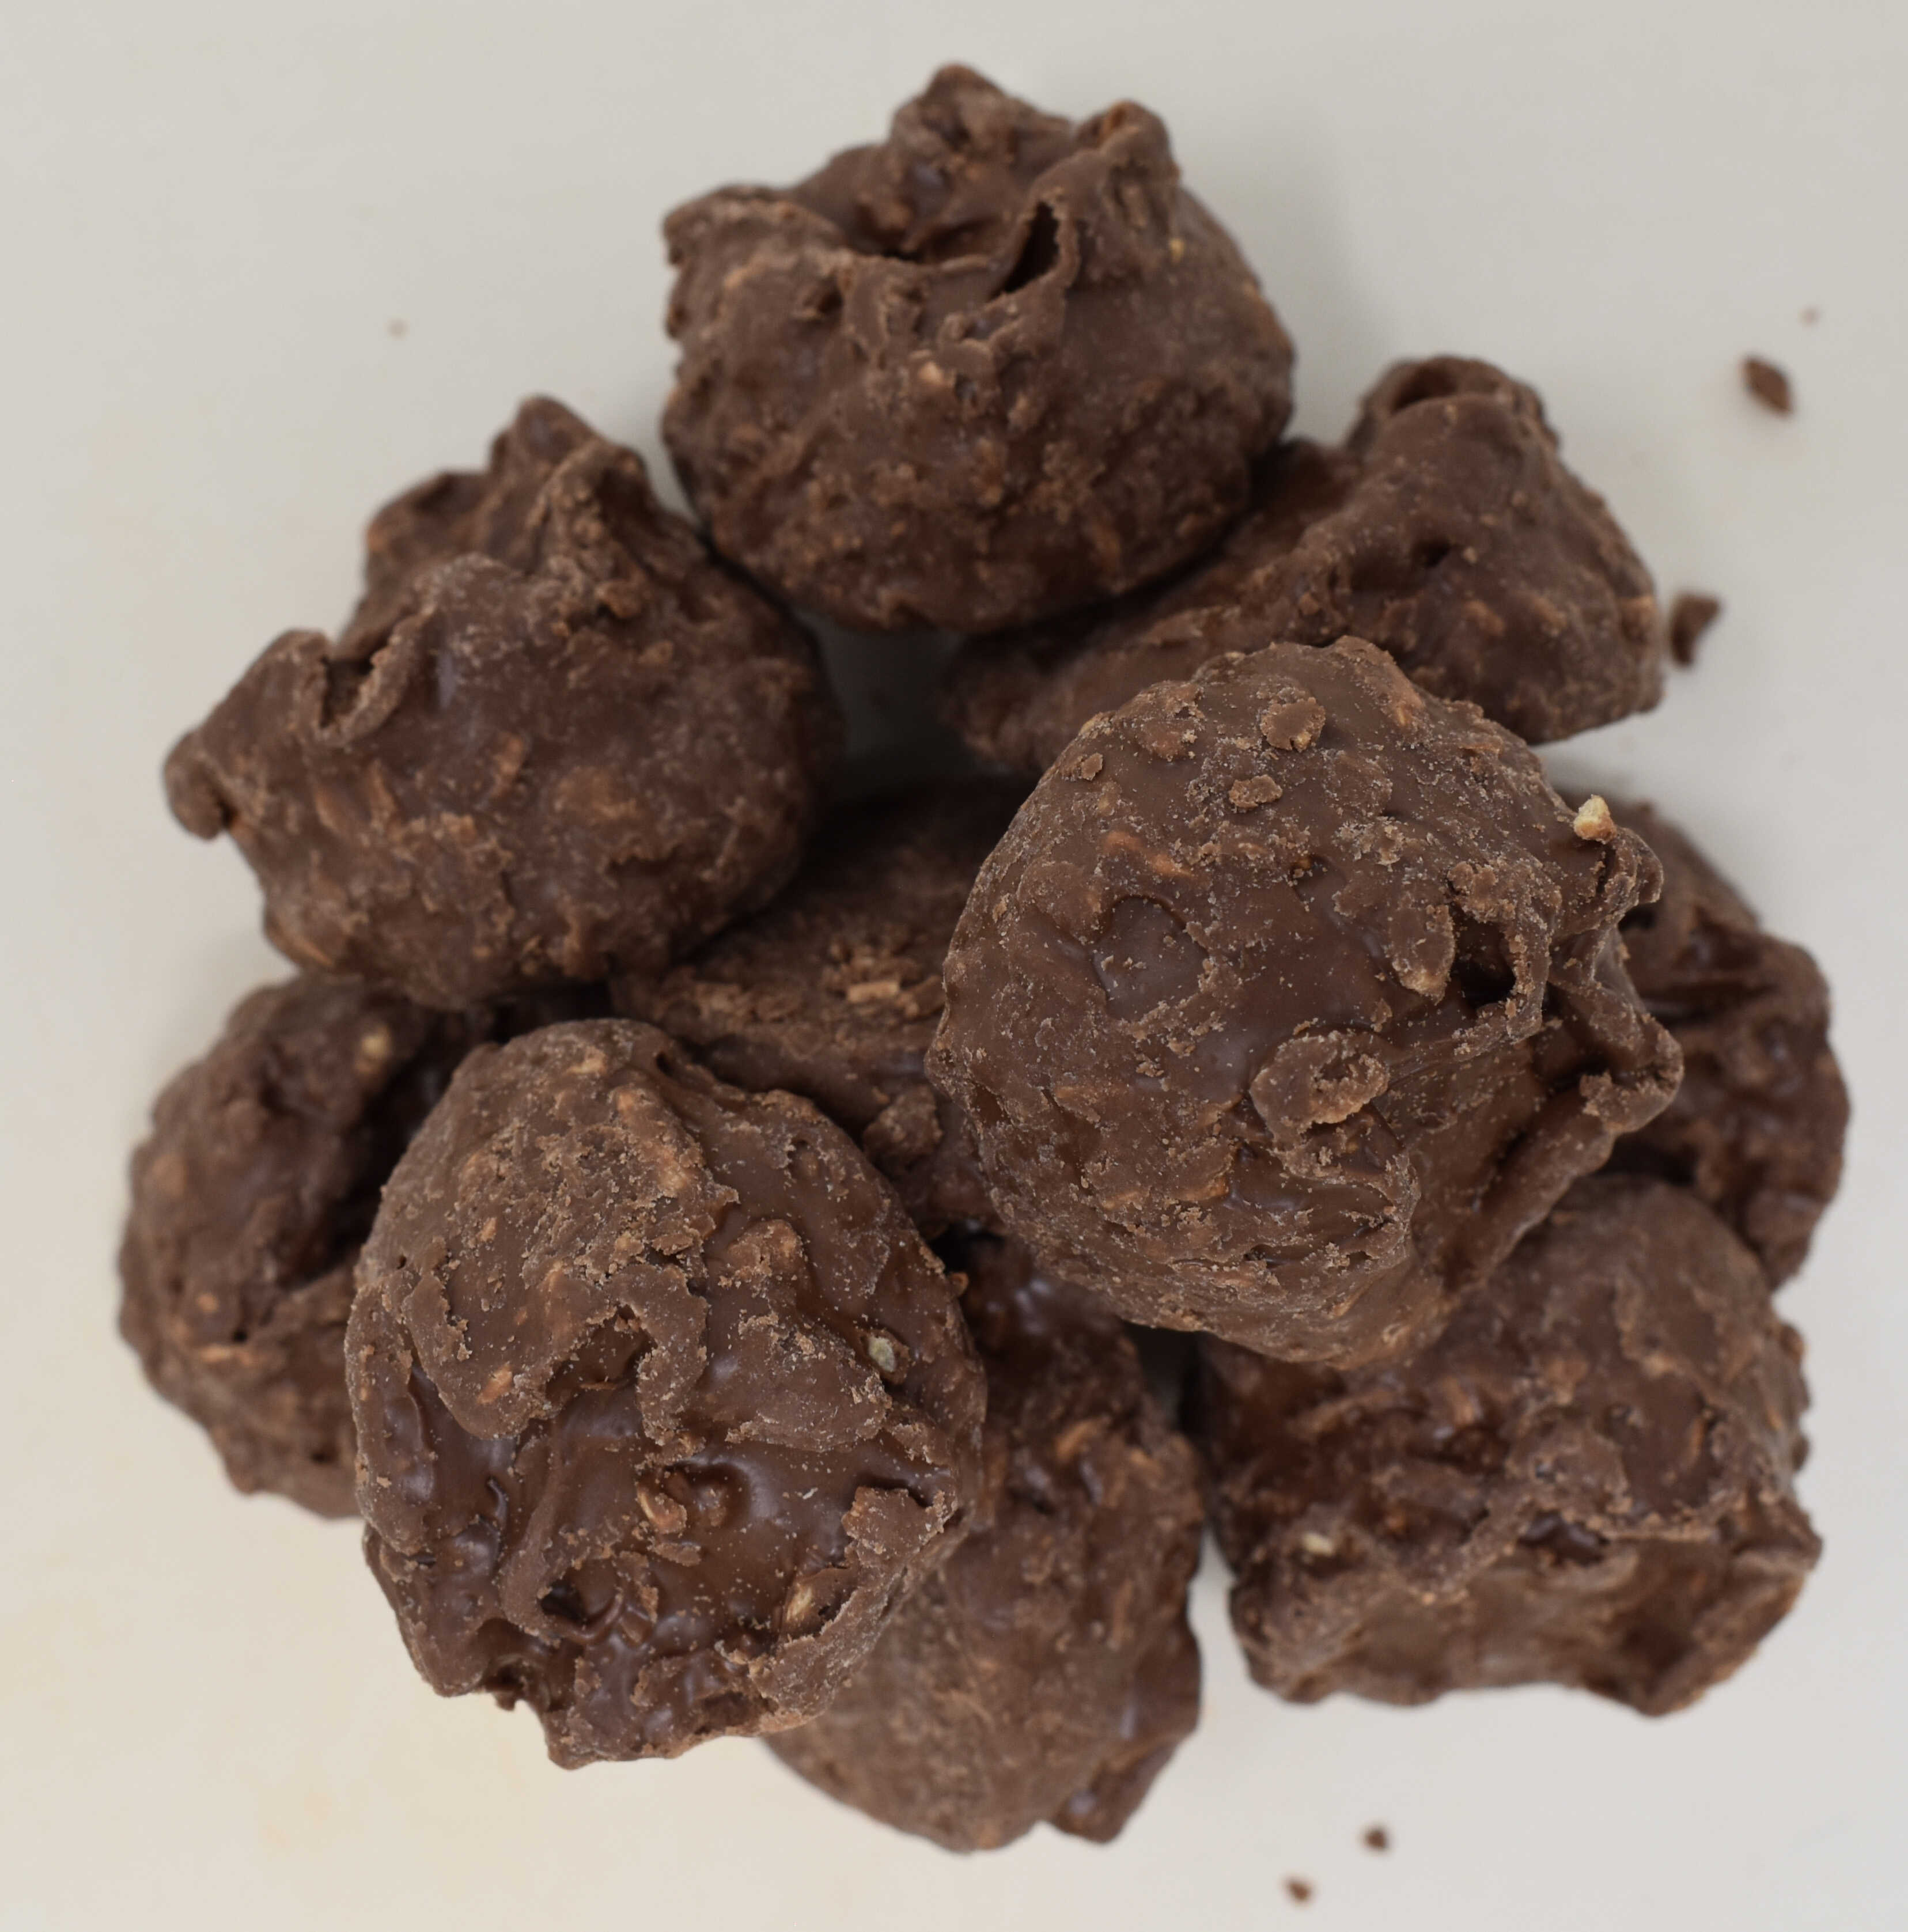 Chocolate Coconut Clusters - Top Photo